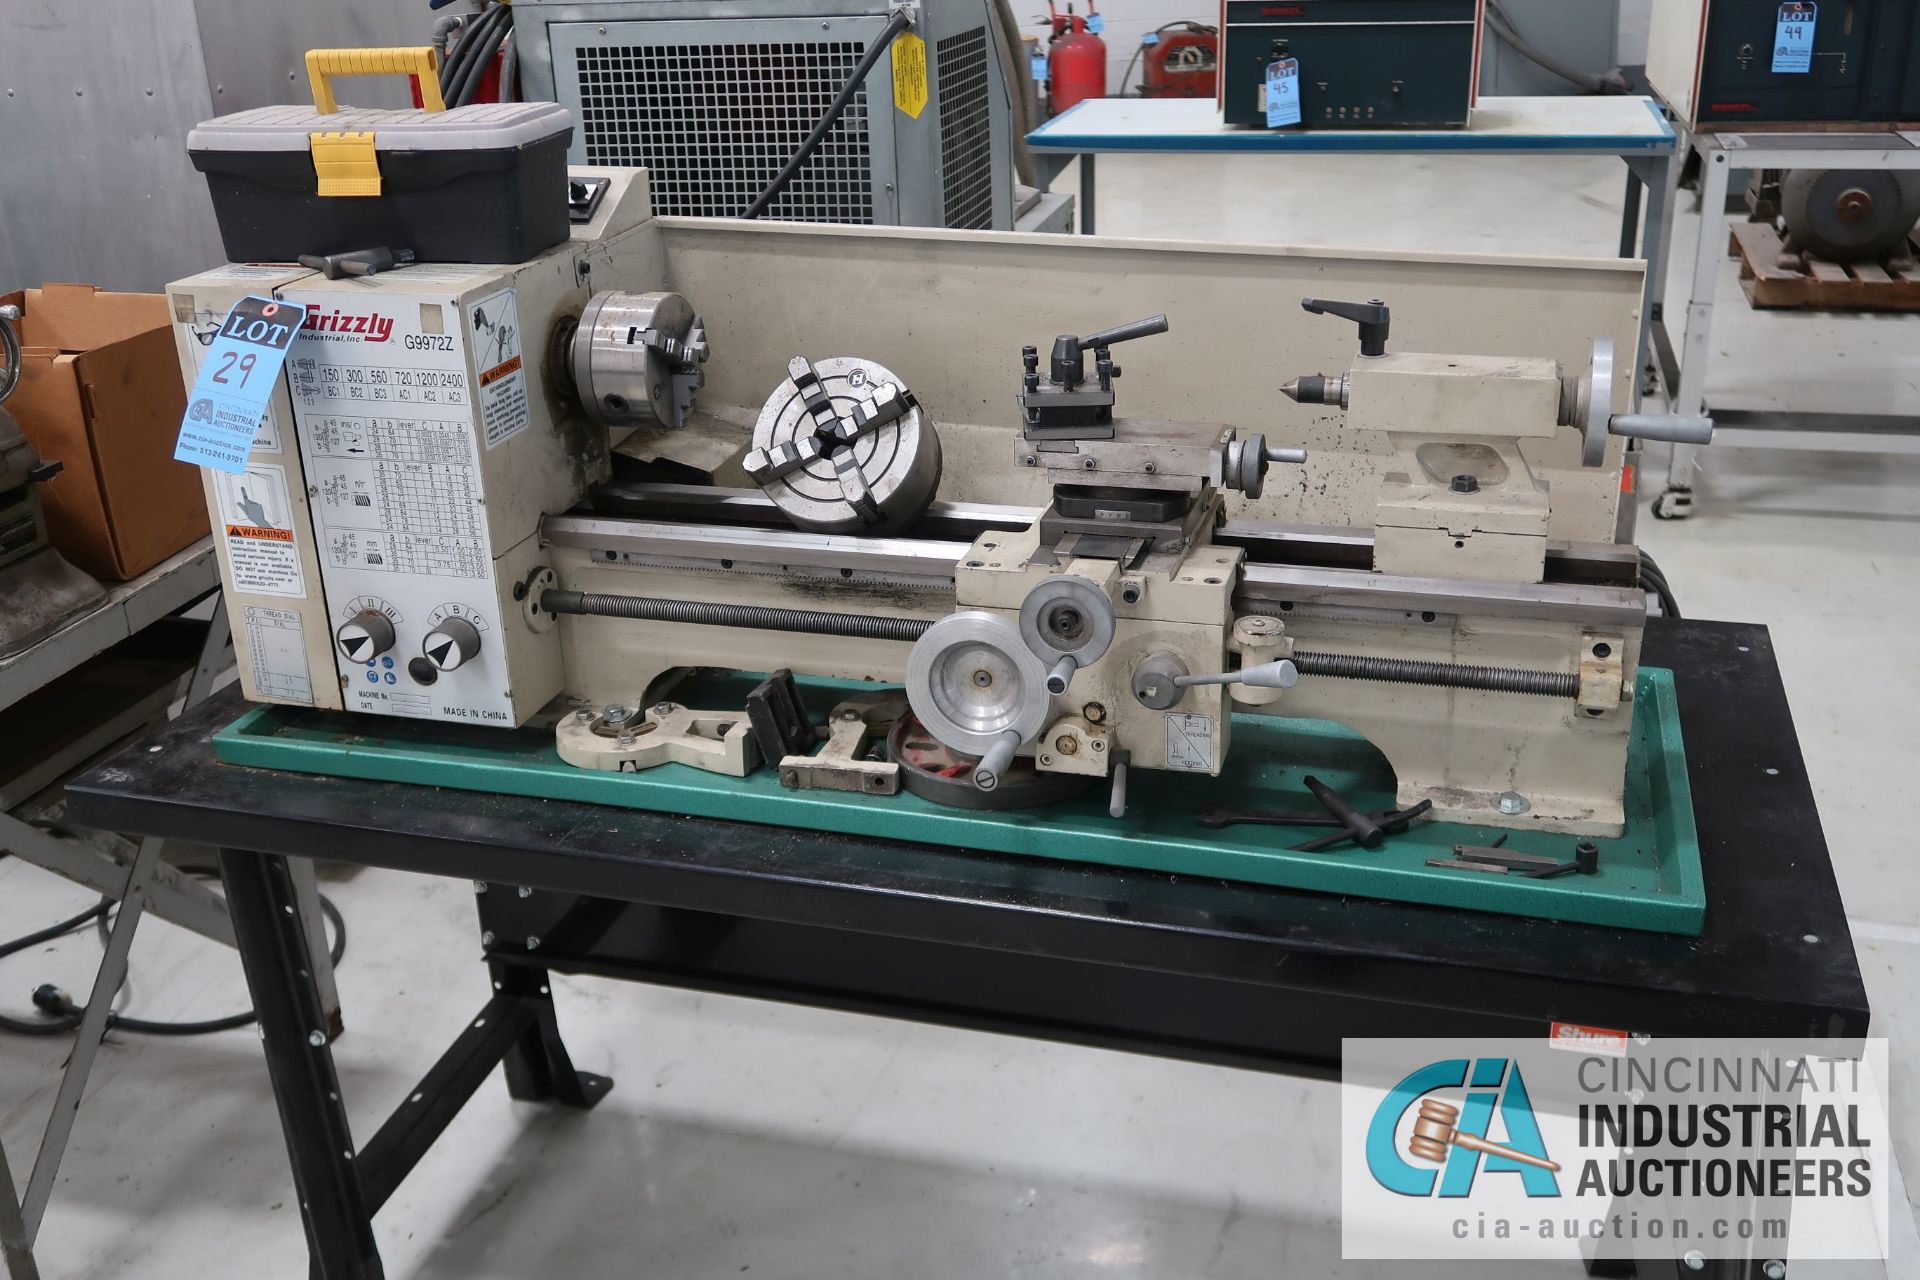 11" X 26" GRIZZLY MODEL G9972Z MILO SIZE BENCH TOP LATHE; S/N 2011482 (2011), 110 VOLT, WITH WORK